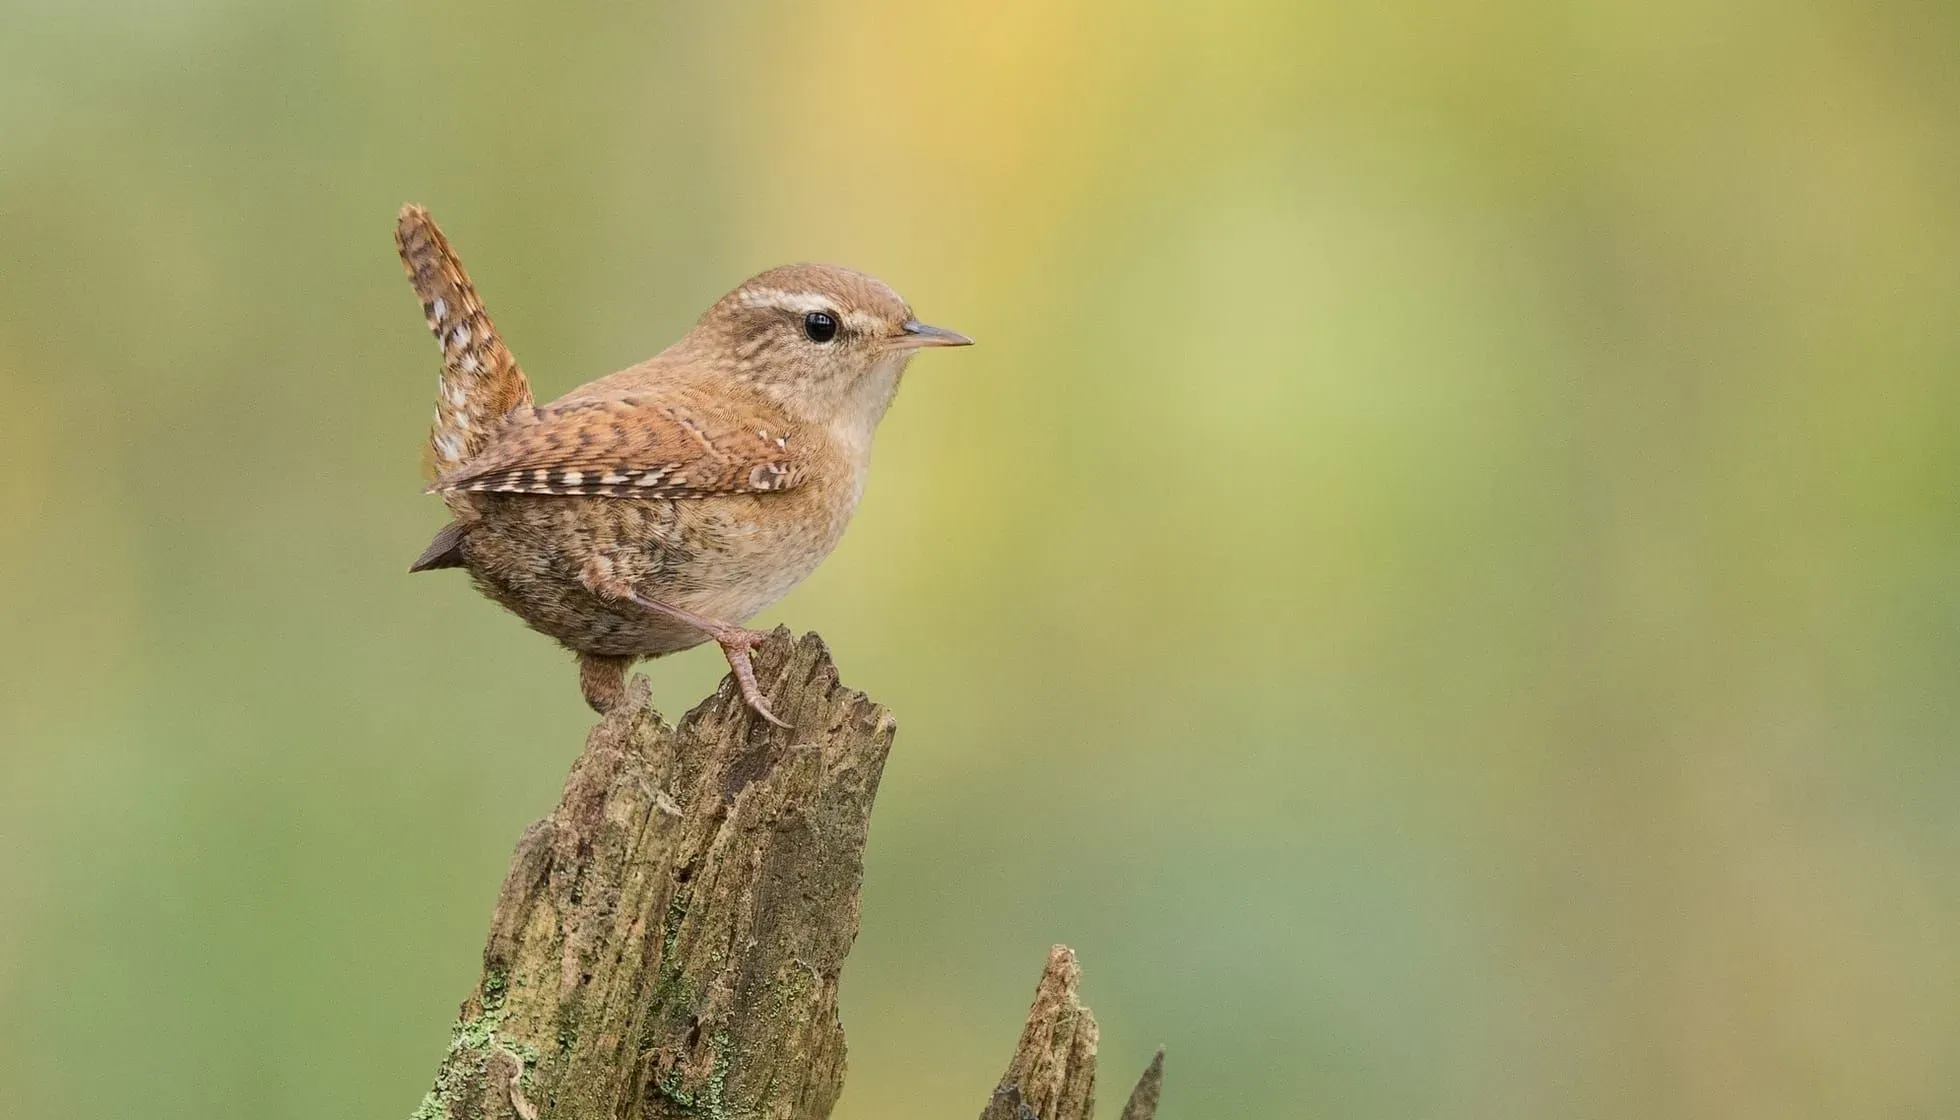 Winter Wren perched on a bark